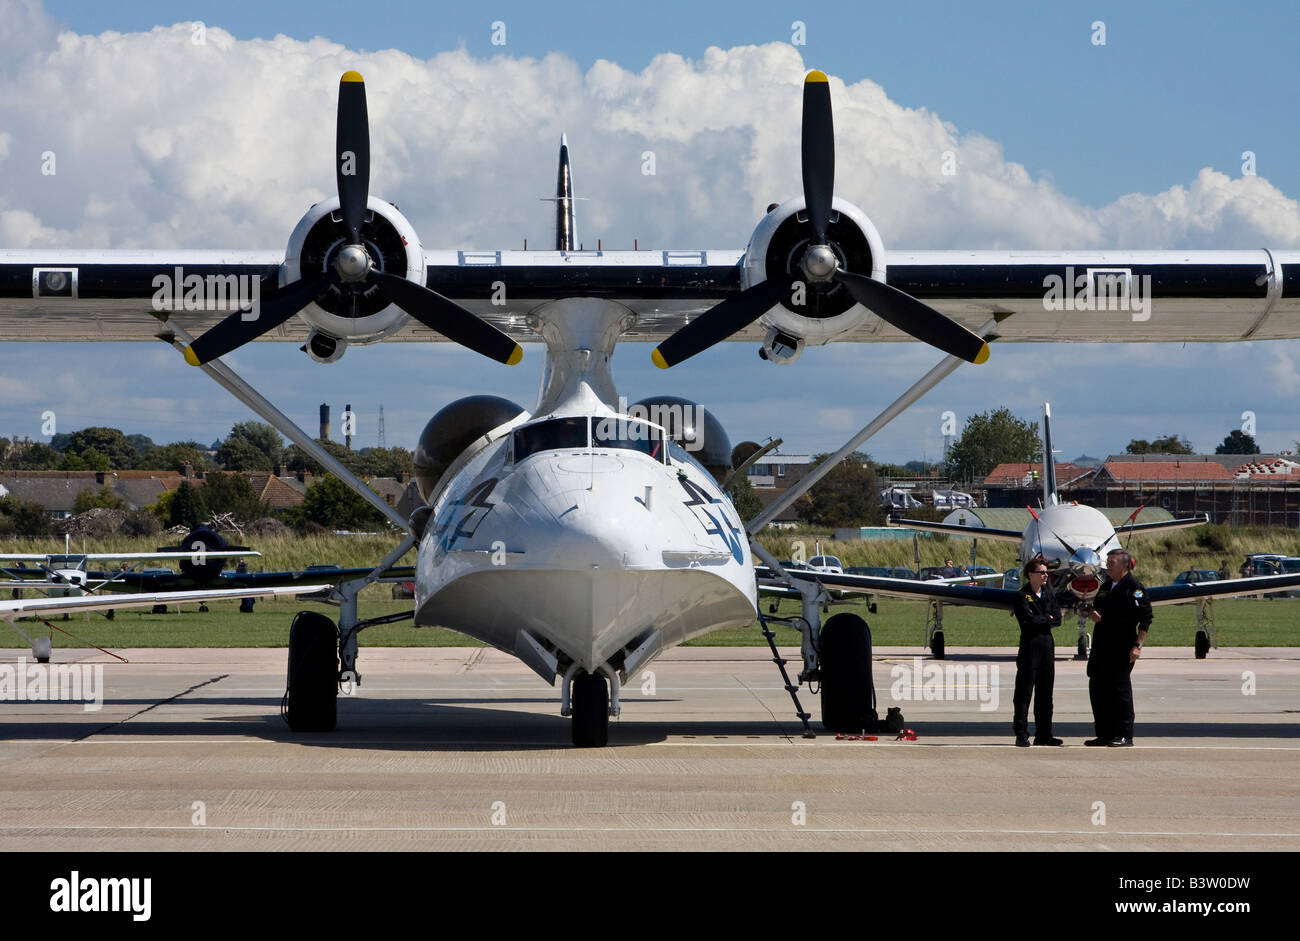 Catalina PBY flying boat on static display at Shoreham Airport, West Sussex, England Stock Photo